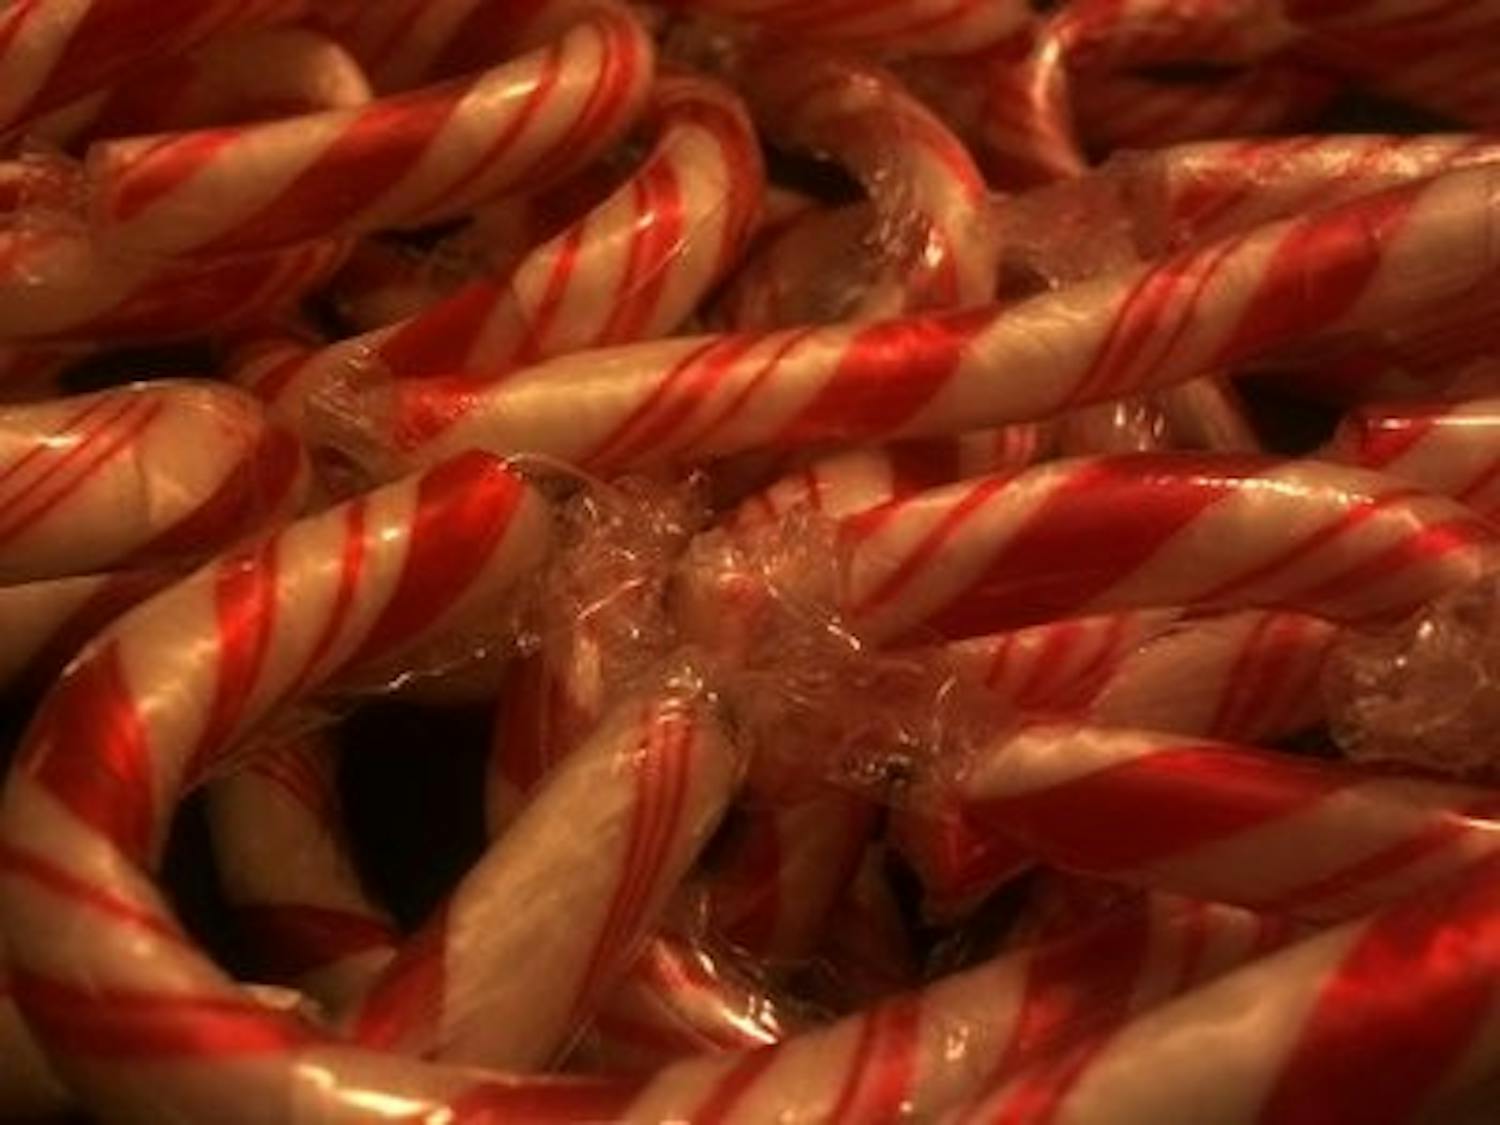 Peppermint can be used in many holiday-themed foods. (Raye May / ASSOCIATE INTRIGUE EDITOR)